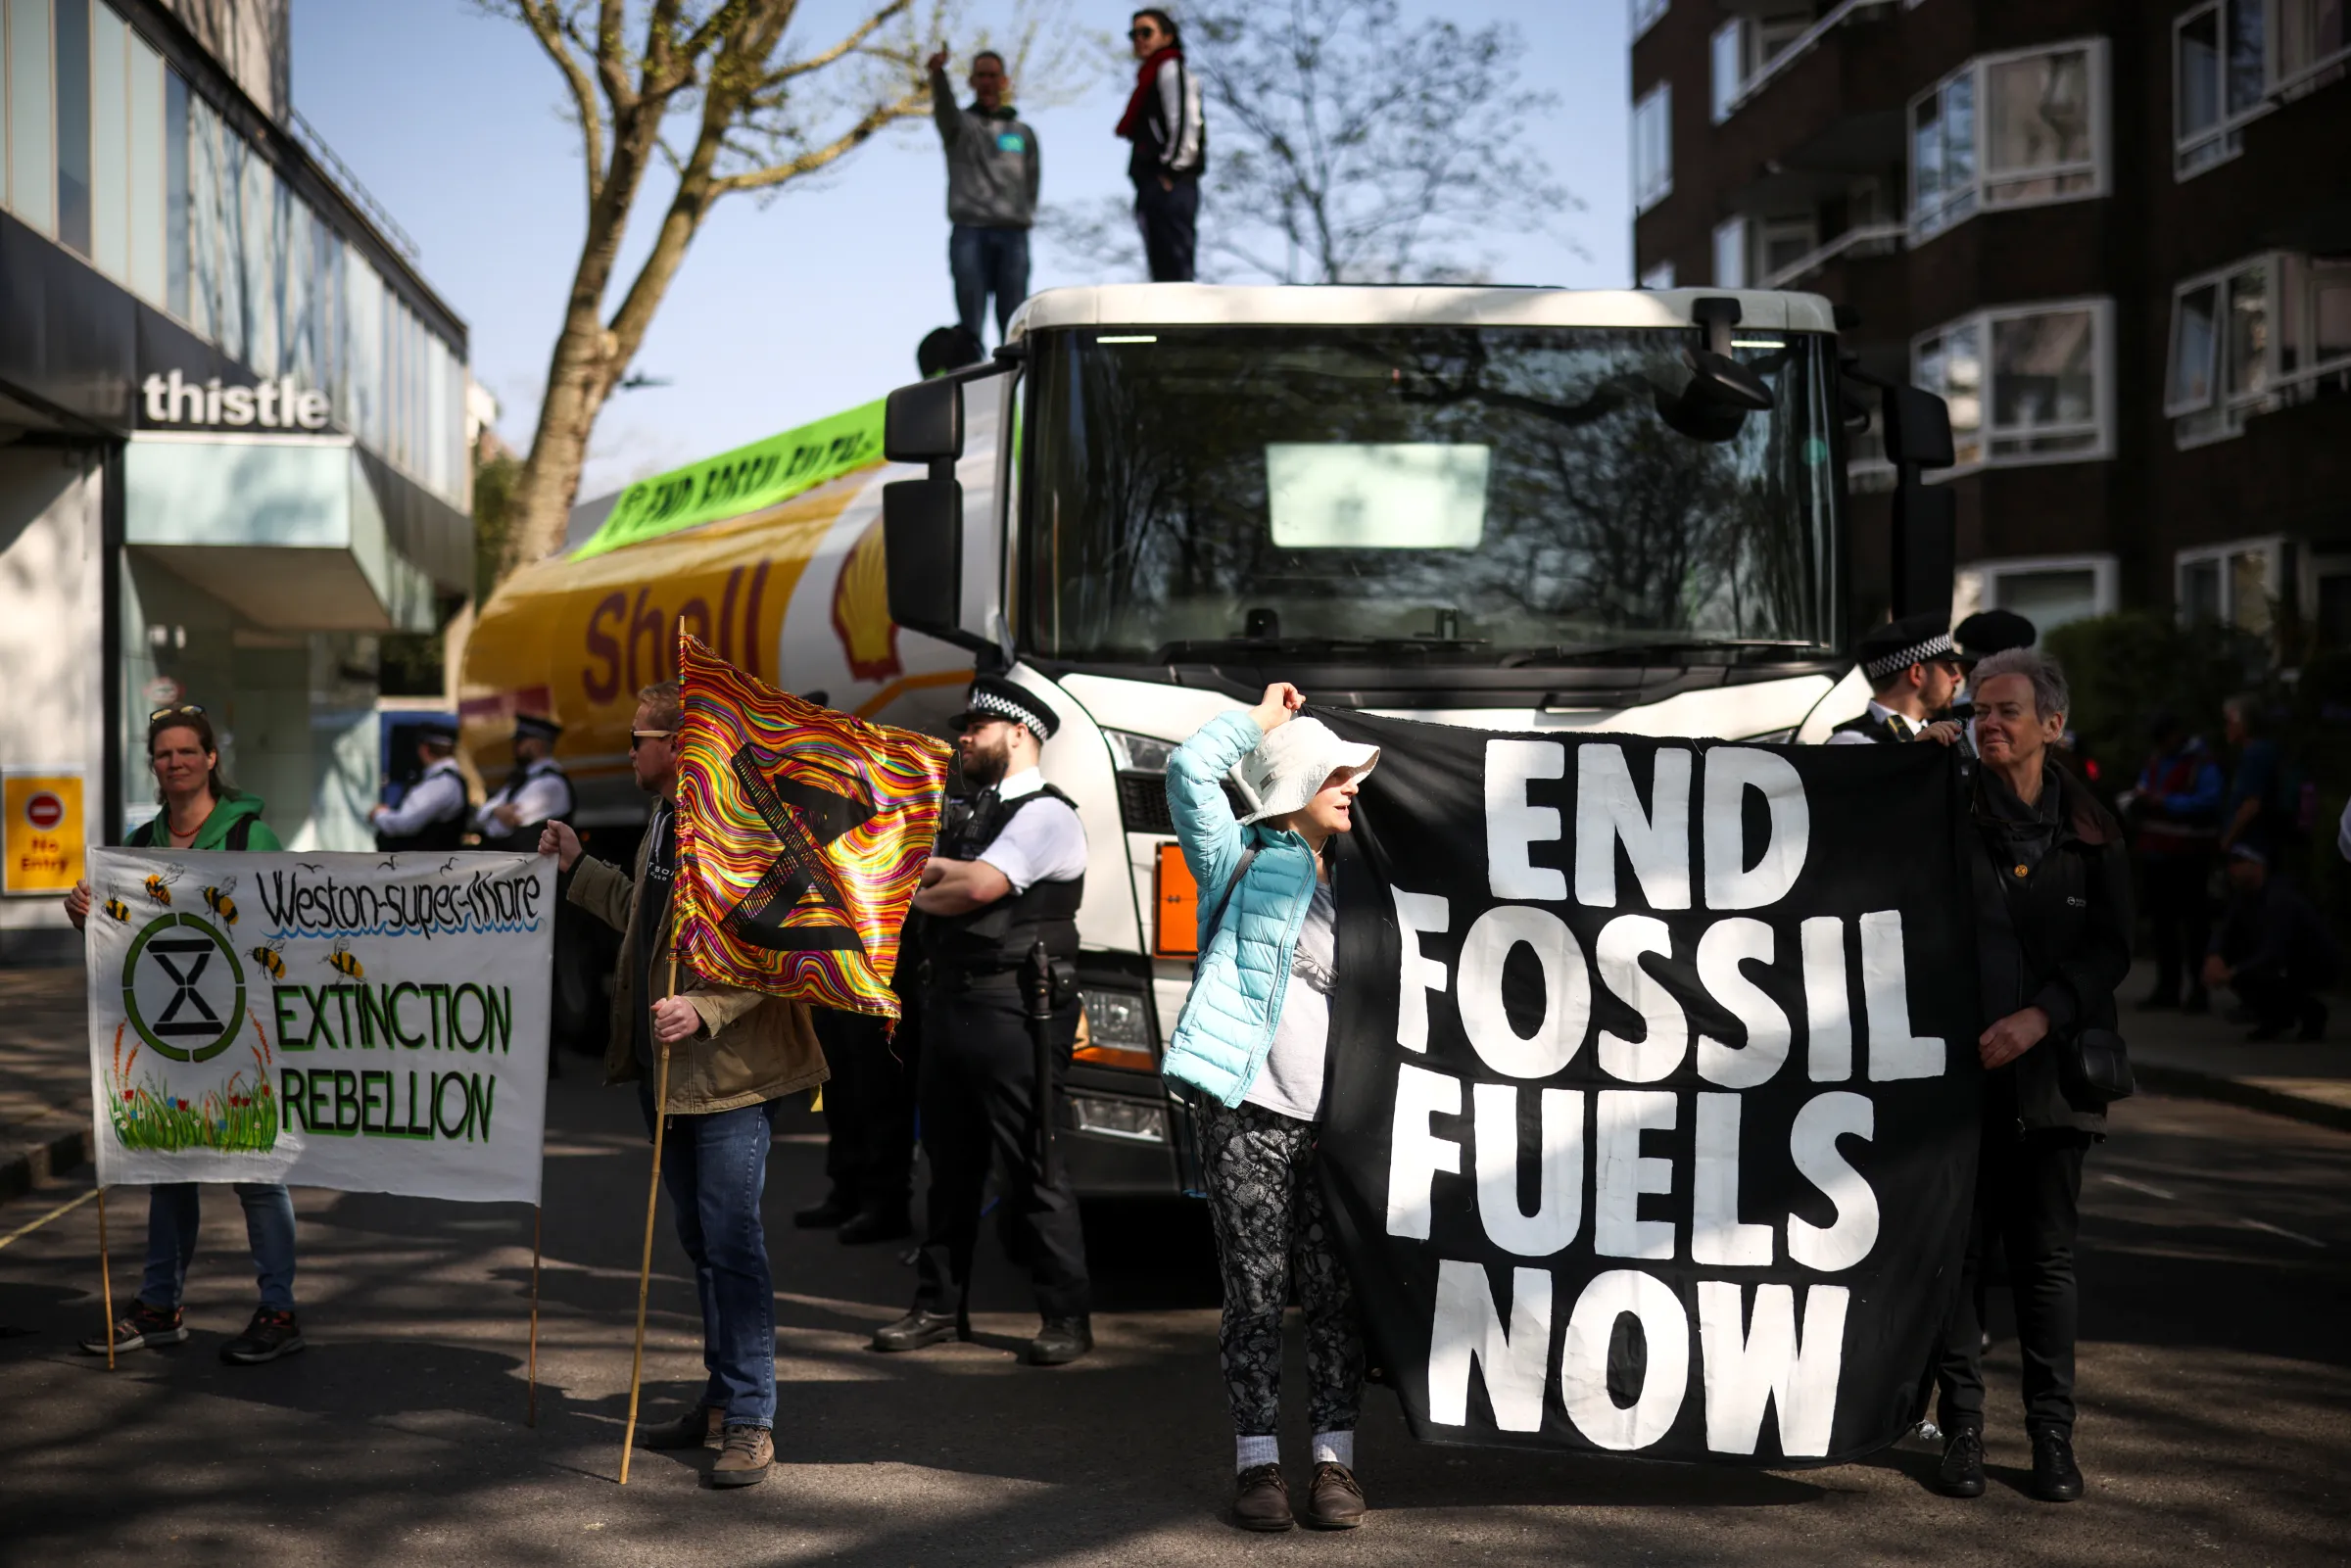 Activists from Extinction Rebellion occupy an oil tanker during a protest calling for an end to fossil fuels, in central London, Britain, April 16, 2022. REUTERS/Henry Nicholls